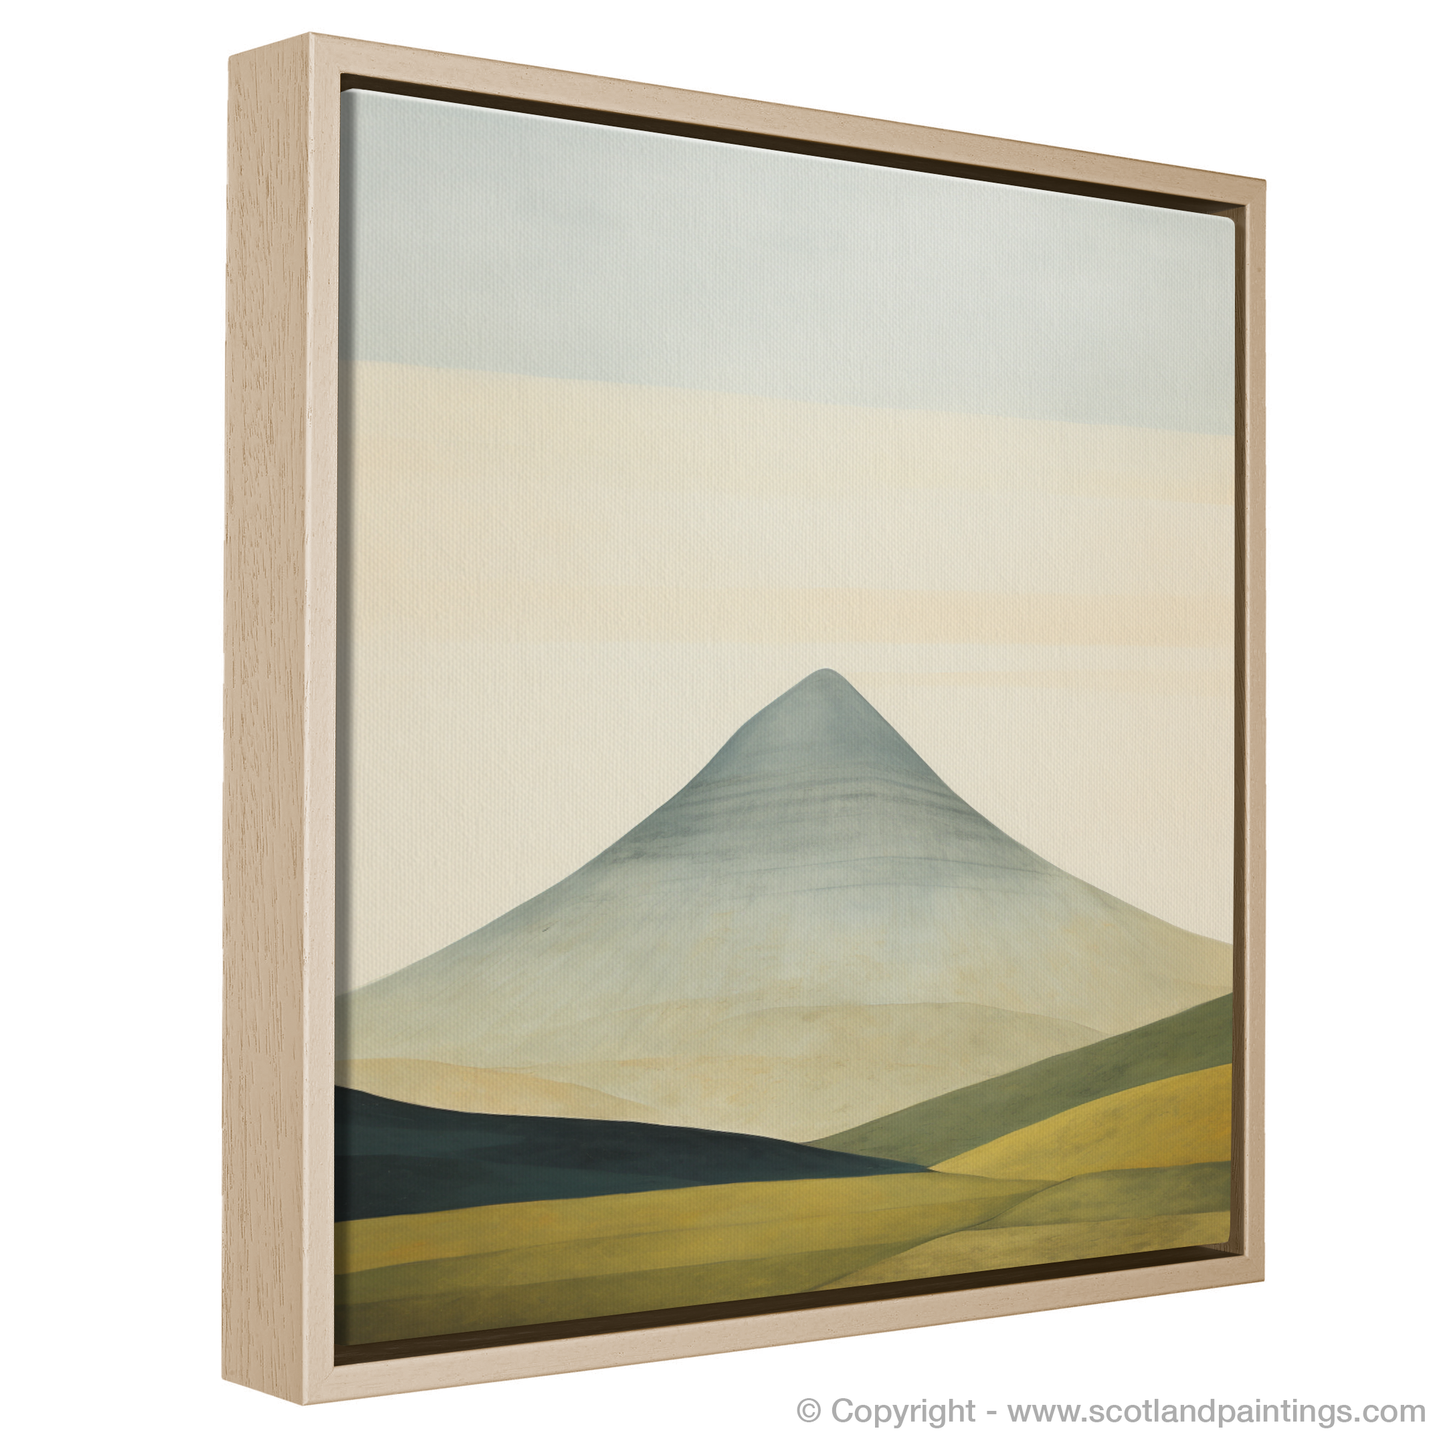 Painting and Art Print of Meall Garbh (Càrn Mairg) entitled "Abstract Apex: Meall Garbh Reimagined".